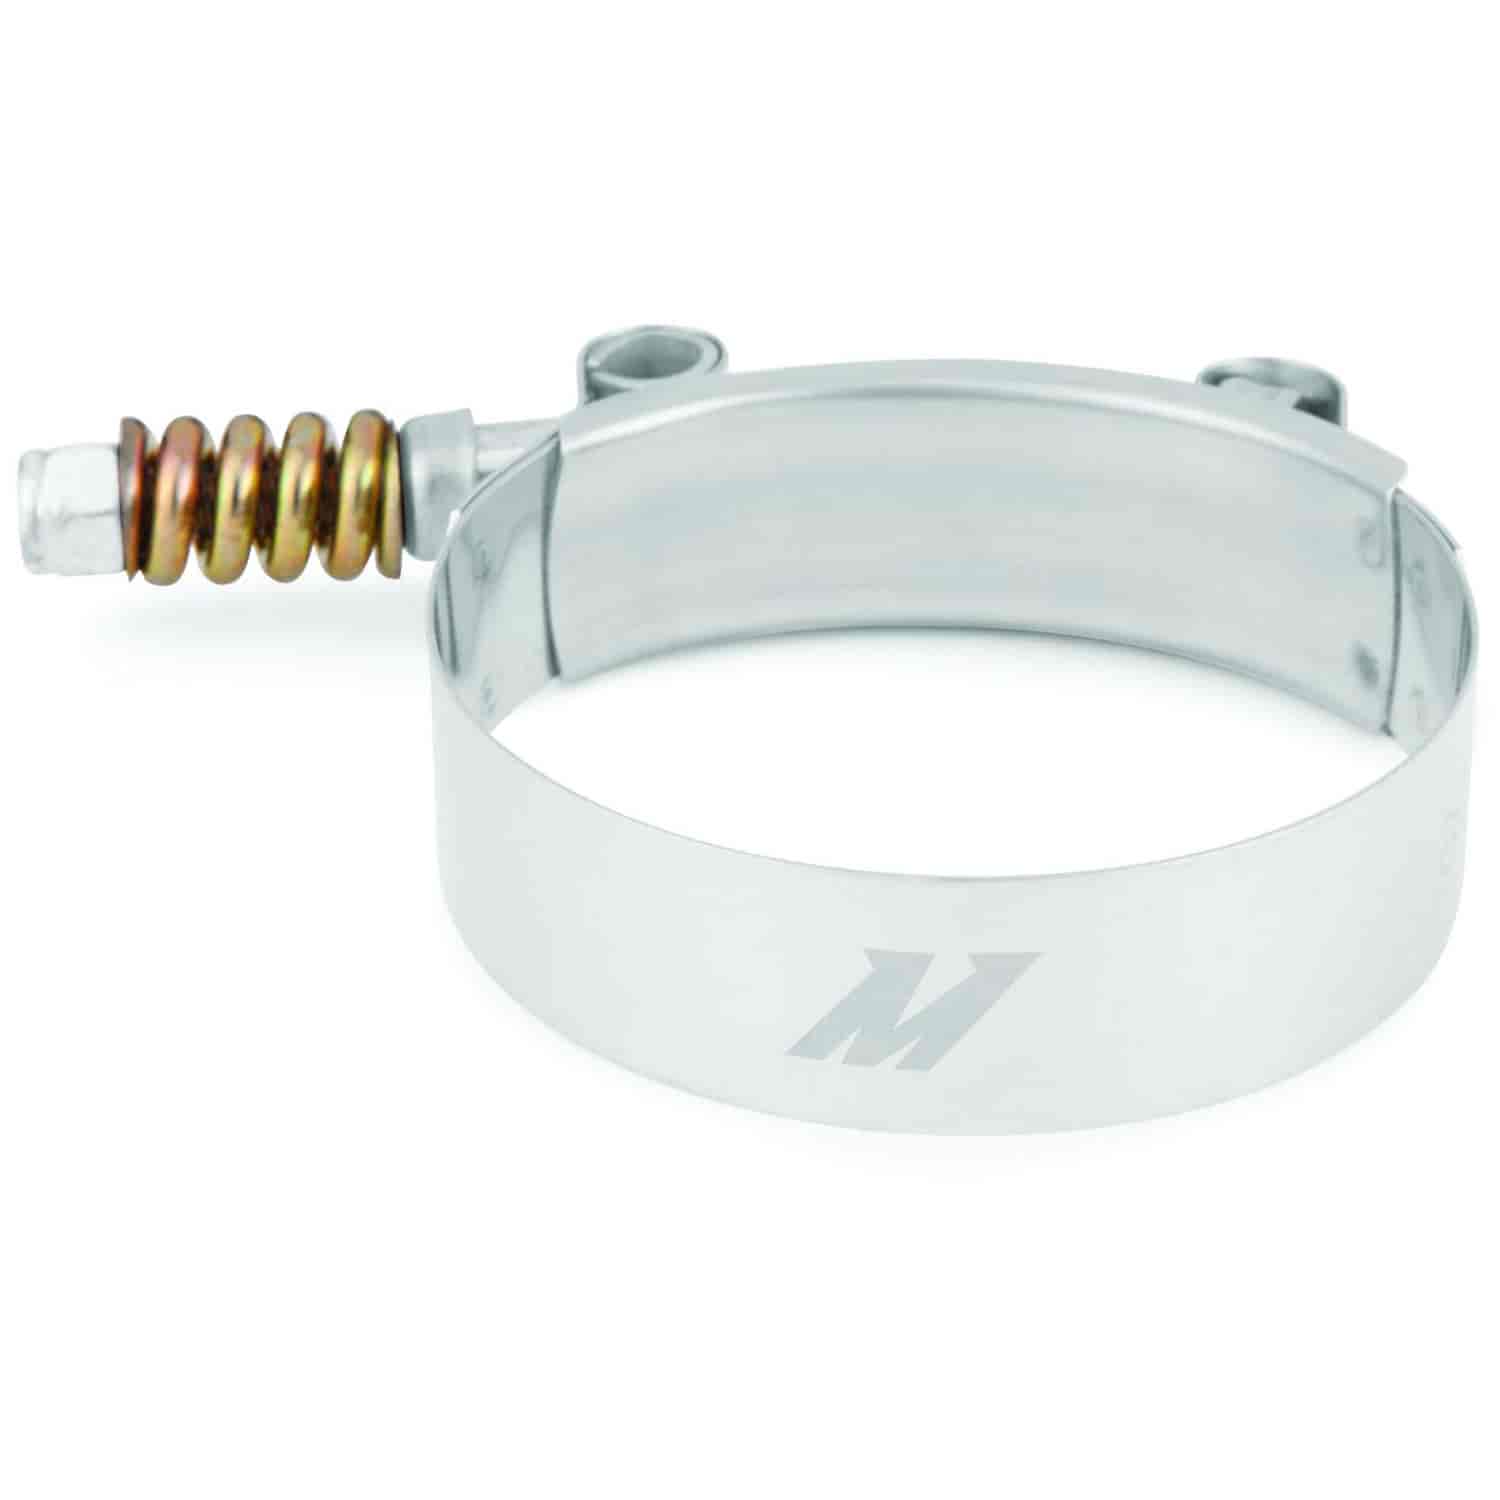 2.5" Constant Tension T-Bolt Hose Clamp 2.48" (63mm) to 2.76" (70mm) Clamping Range